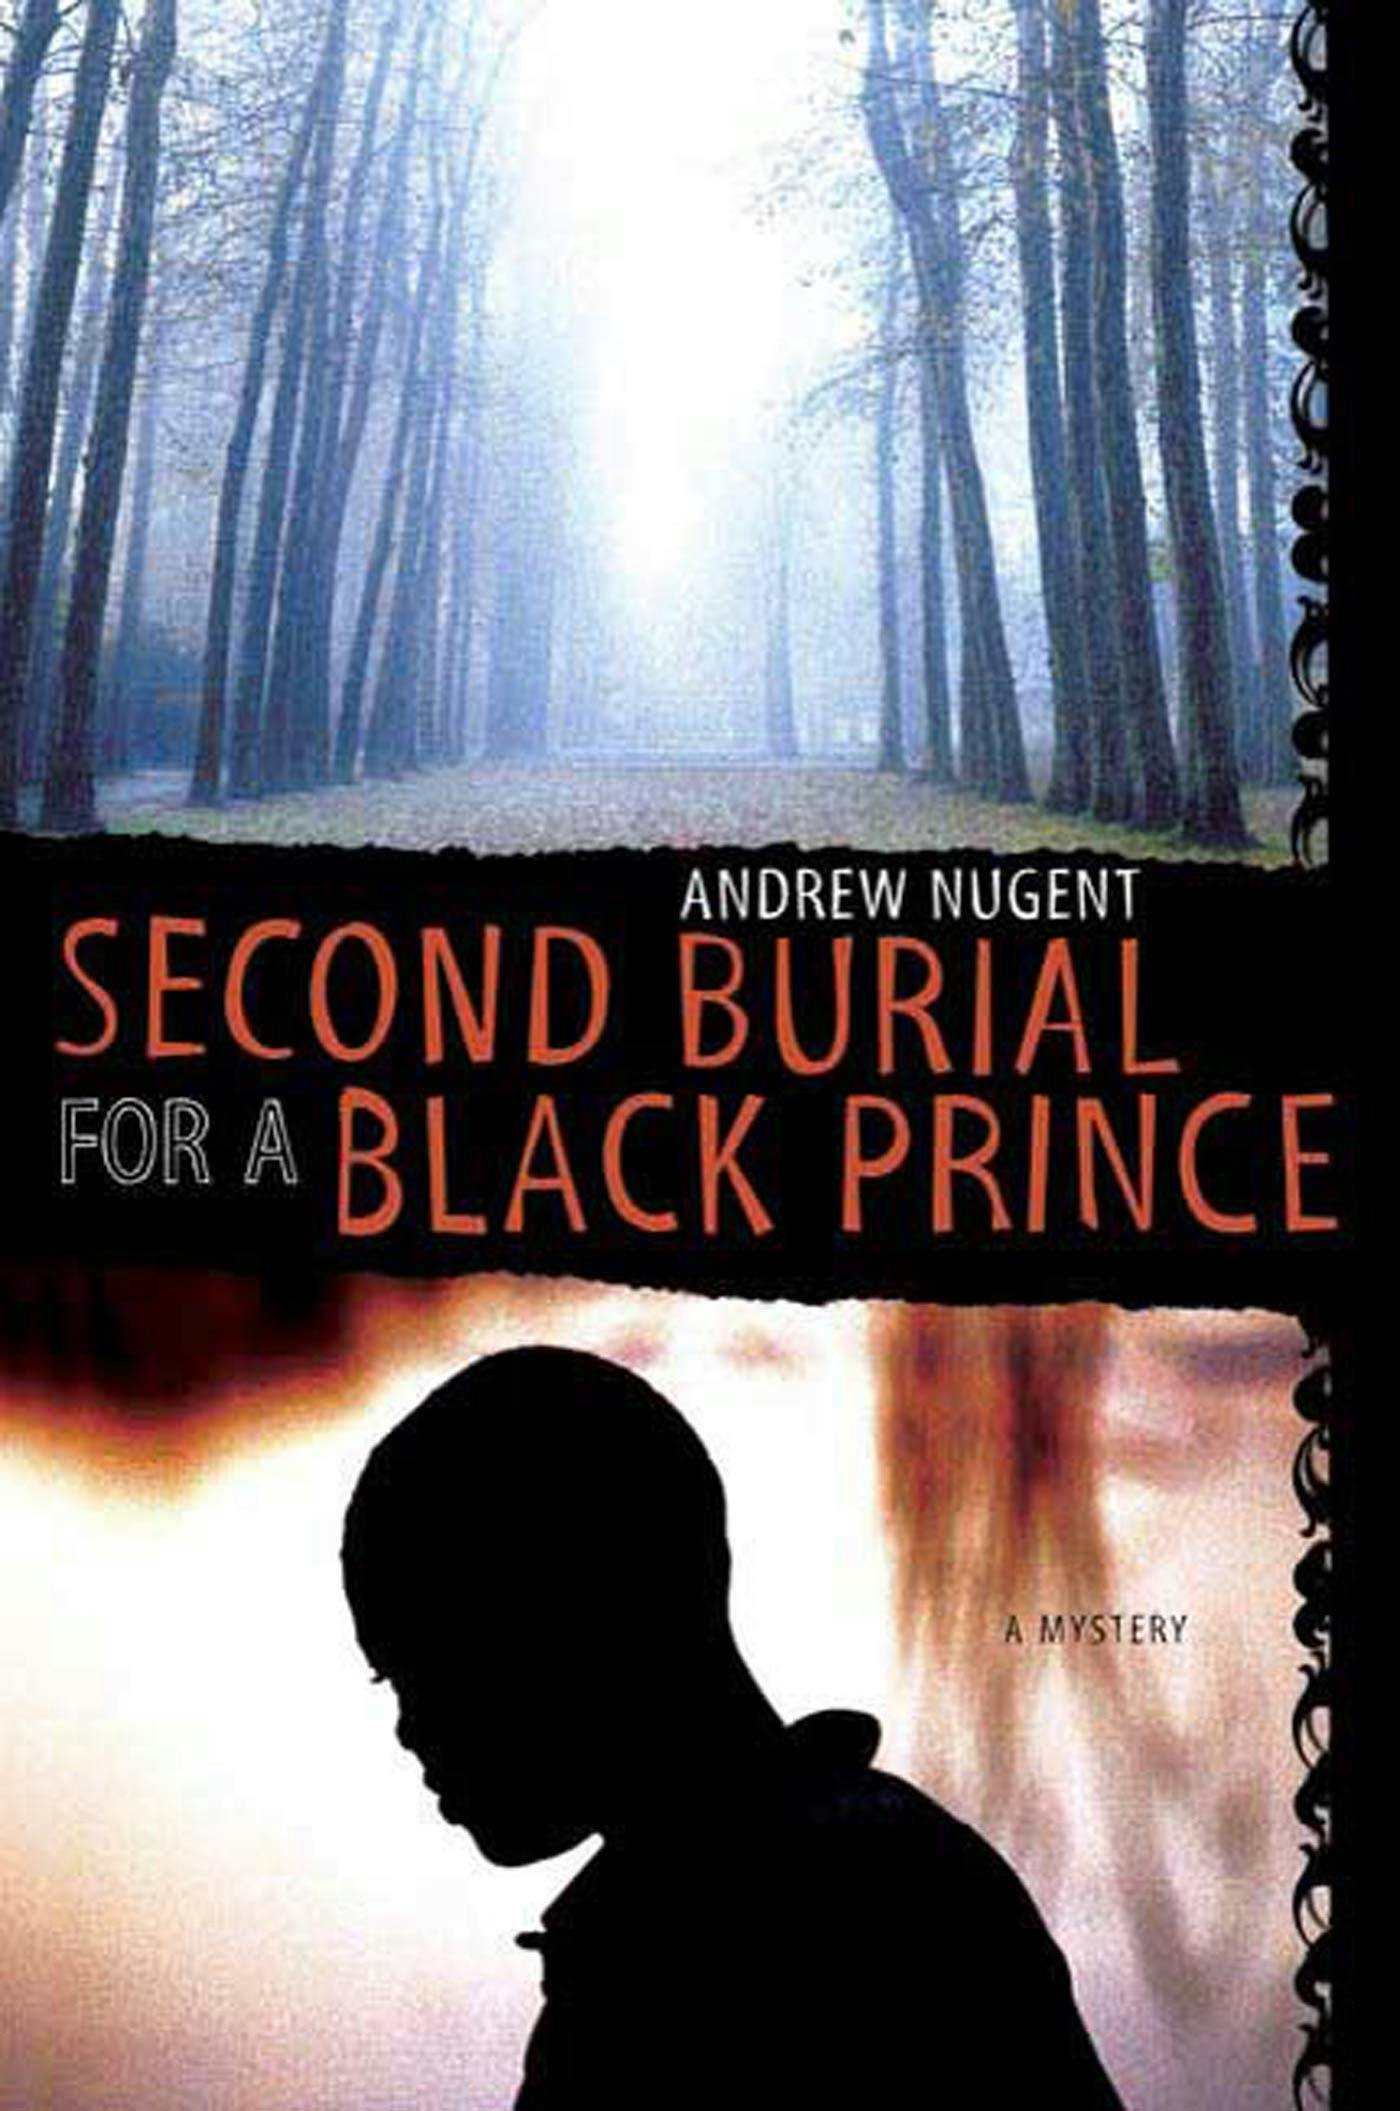 Second Burial for a Black Prince